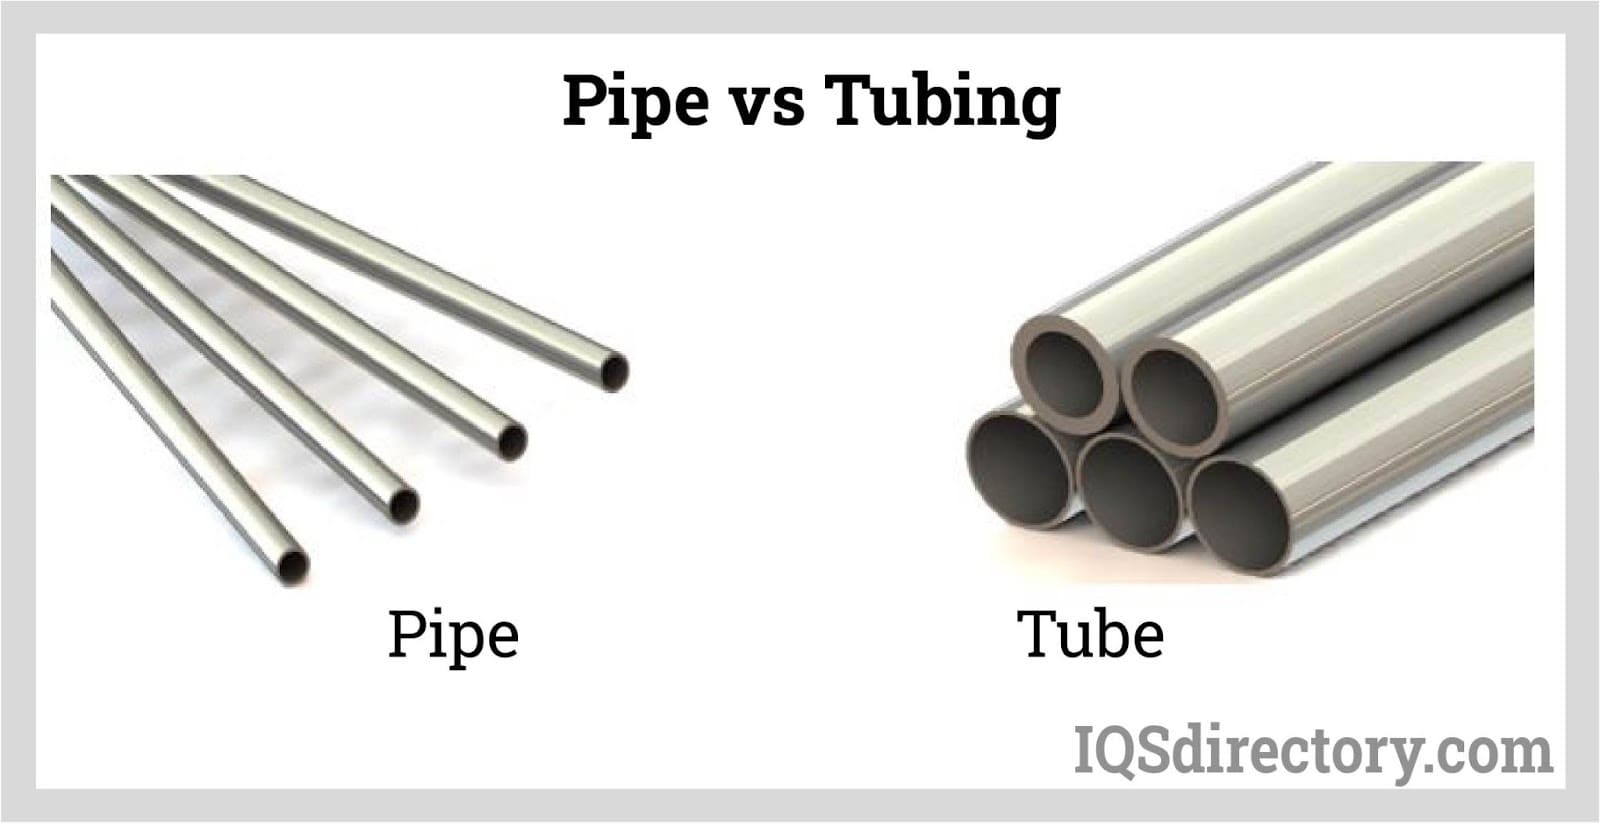 Stainless Steel Tubing: Types, Applications, Benefits, and